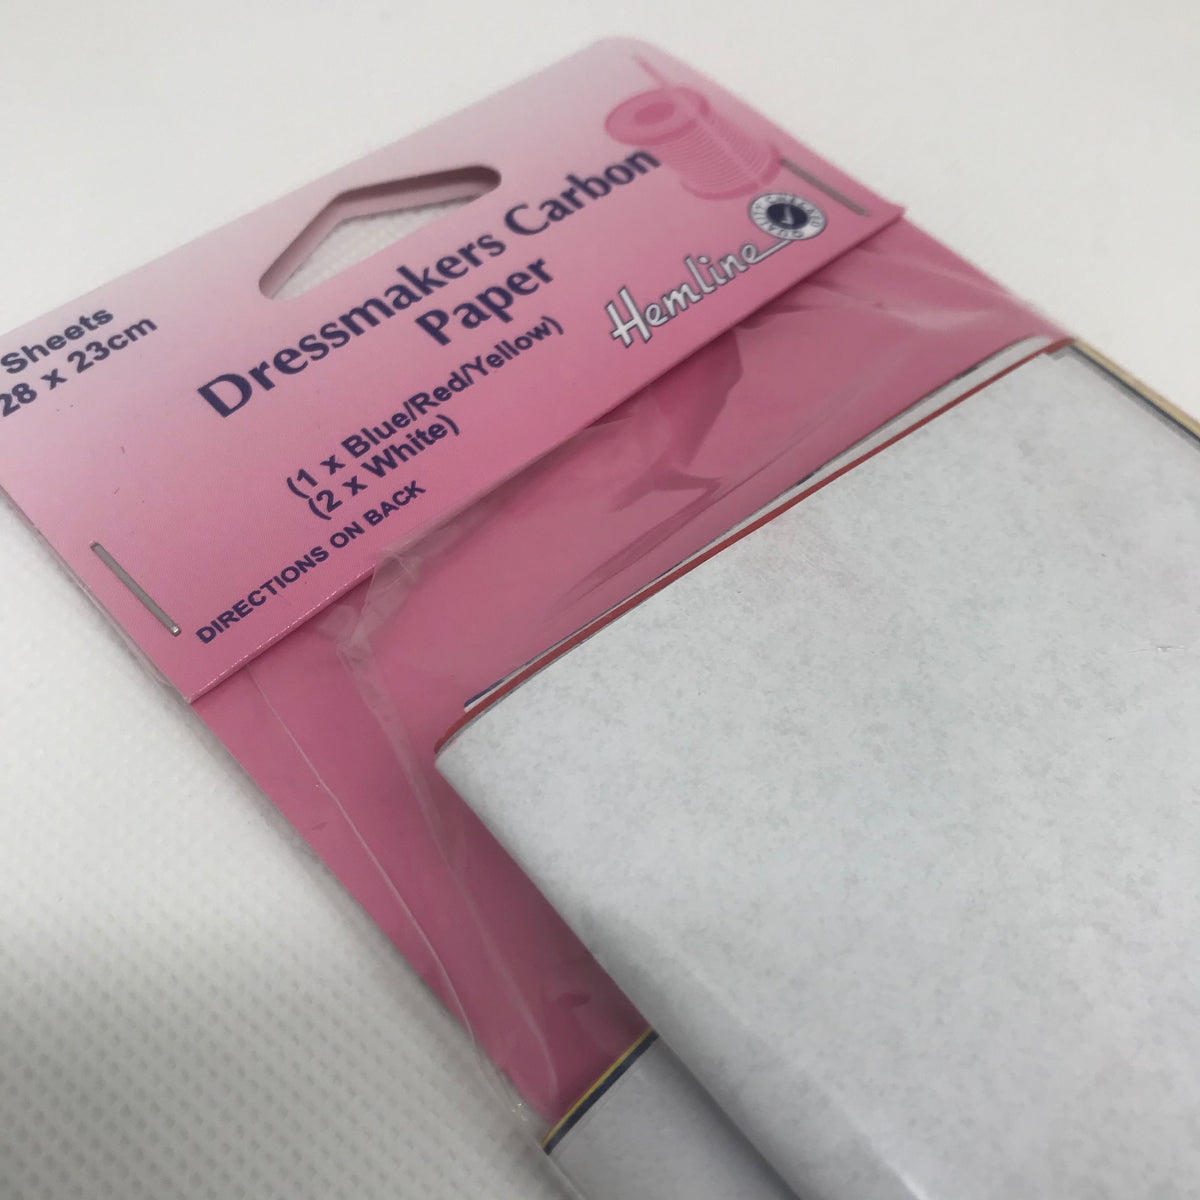 Dressmakers Carbon Copy Paper Hemline Blue Red Yellow White Transfer Ref:  753, 5 Sheets 28 X 23cm and 70 X 24cm 